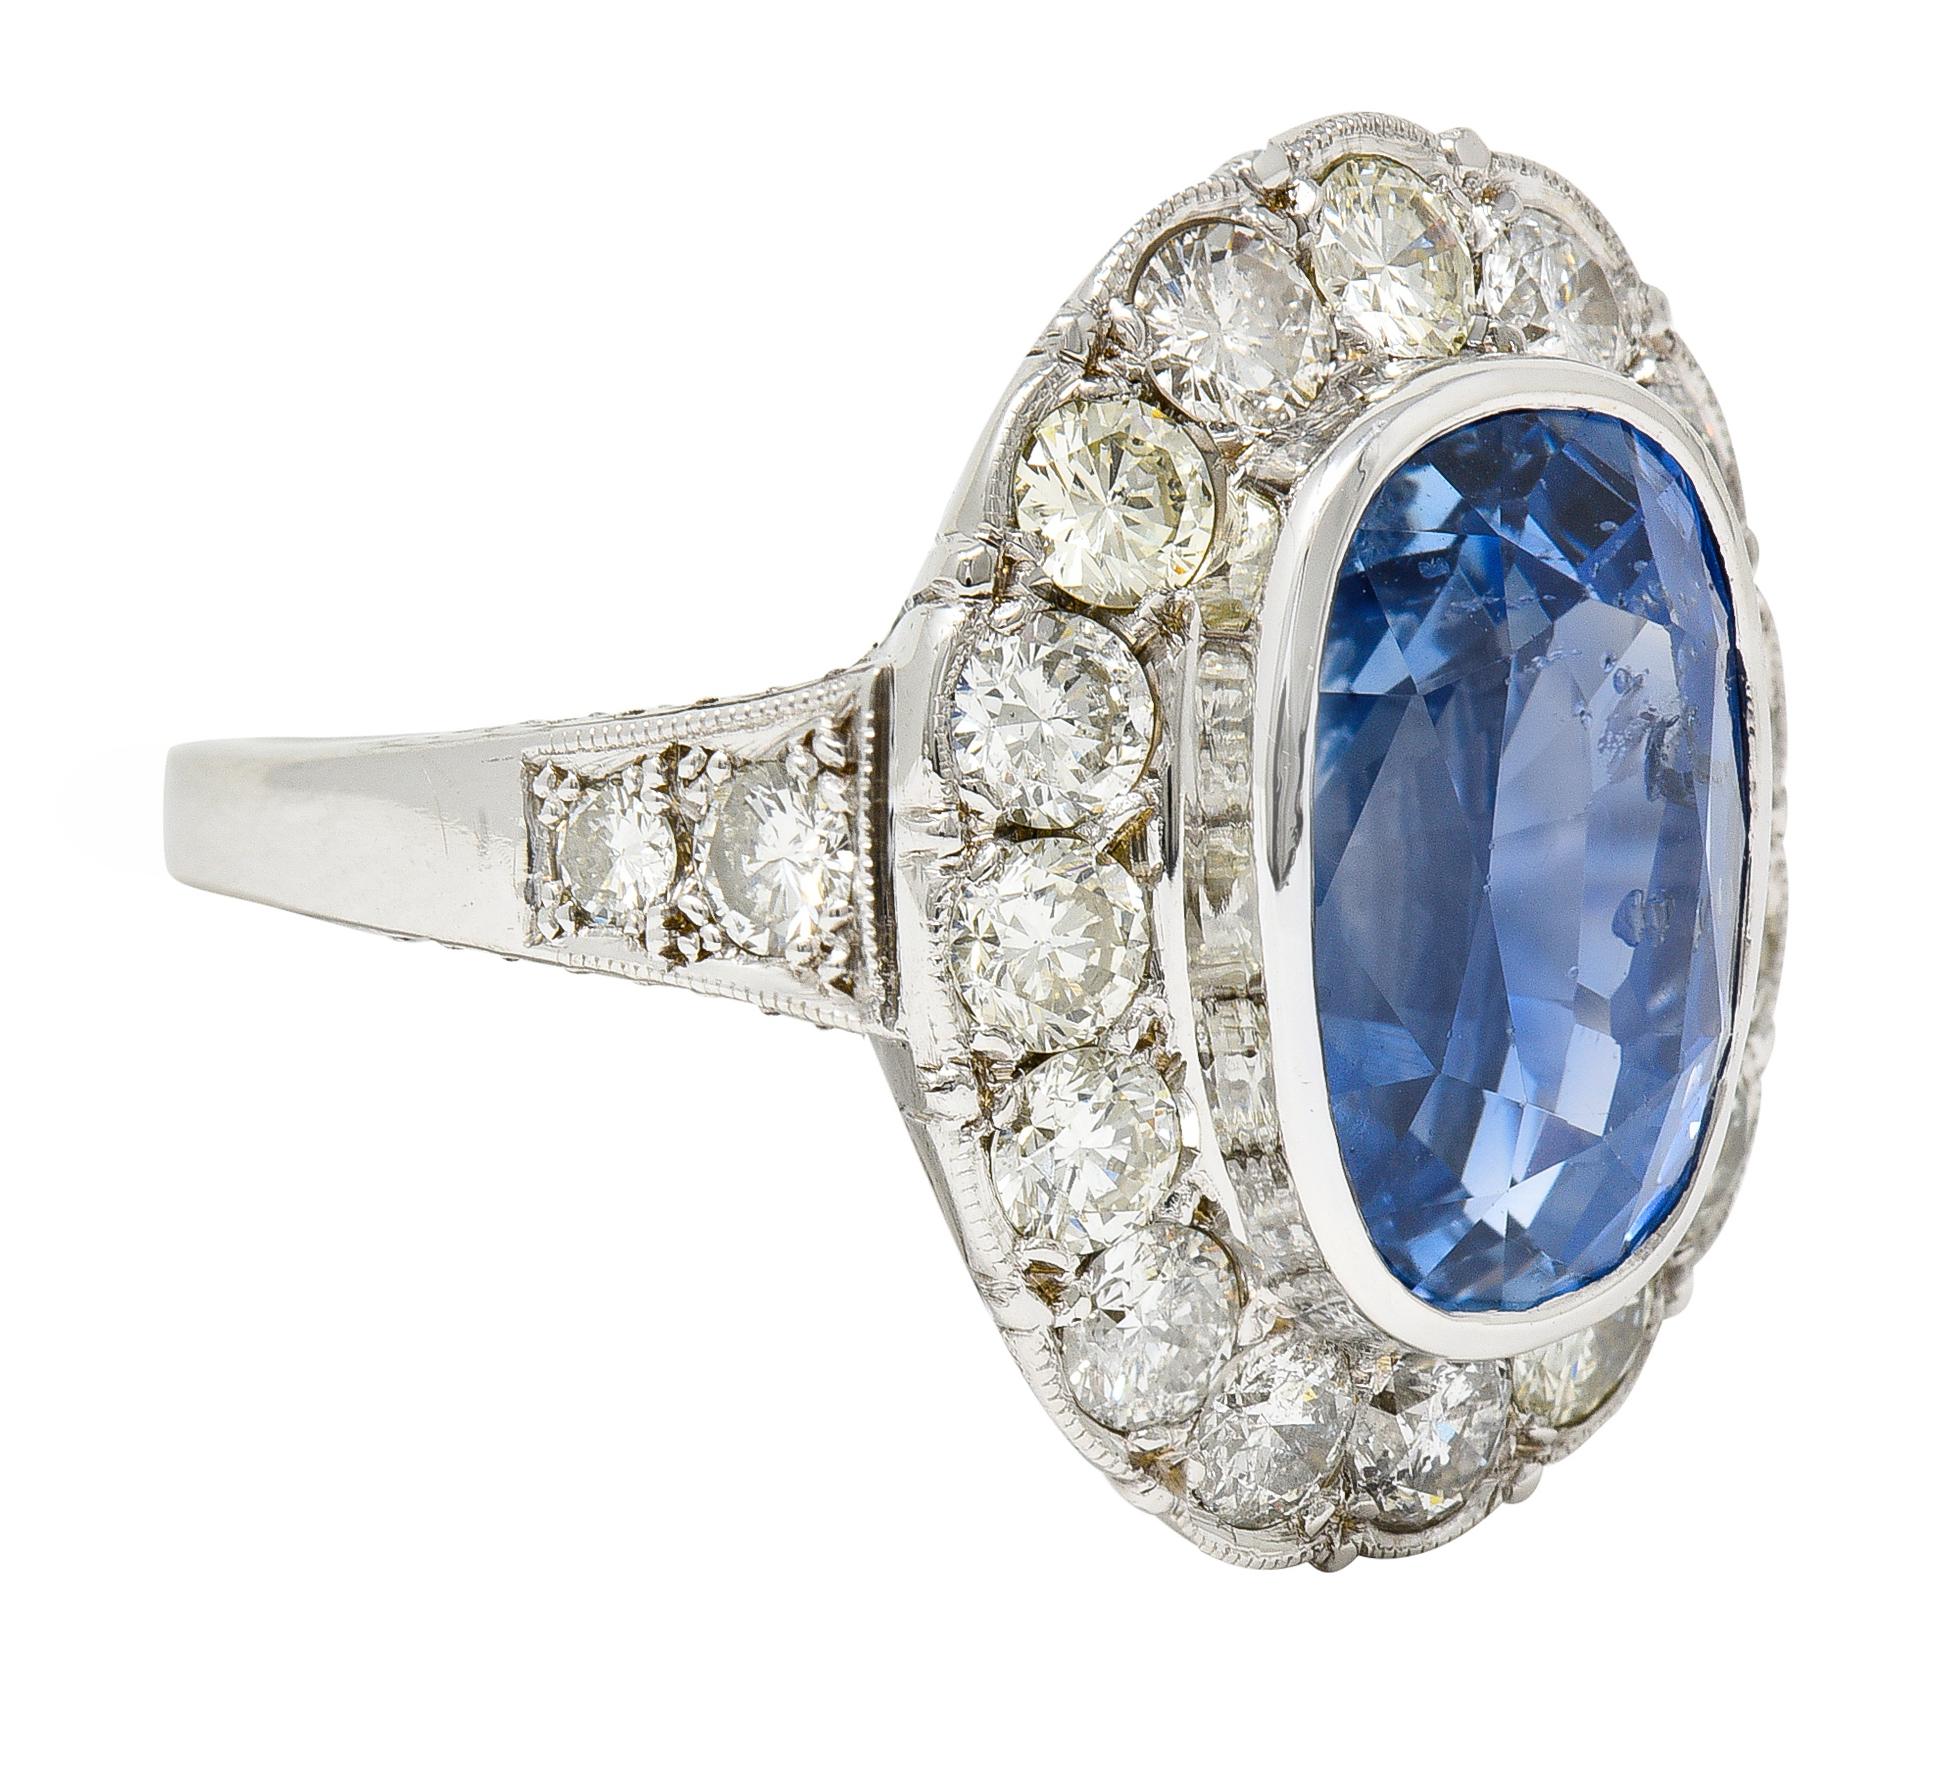 Centering an elongated cushion cut sapphire weighing 8.50 carats - transparent medium blue. Natural Sri Lankan in origin with no indications of heat treatment - bezel set. Featuring a scalloped halo surround of bead set transitional cut diamonds.